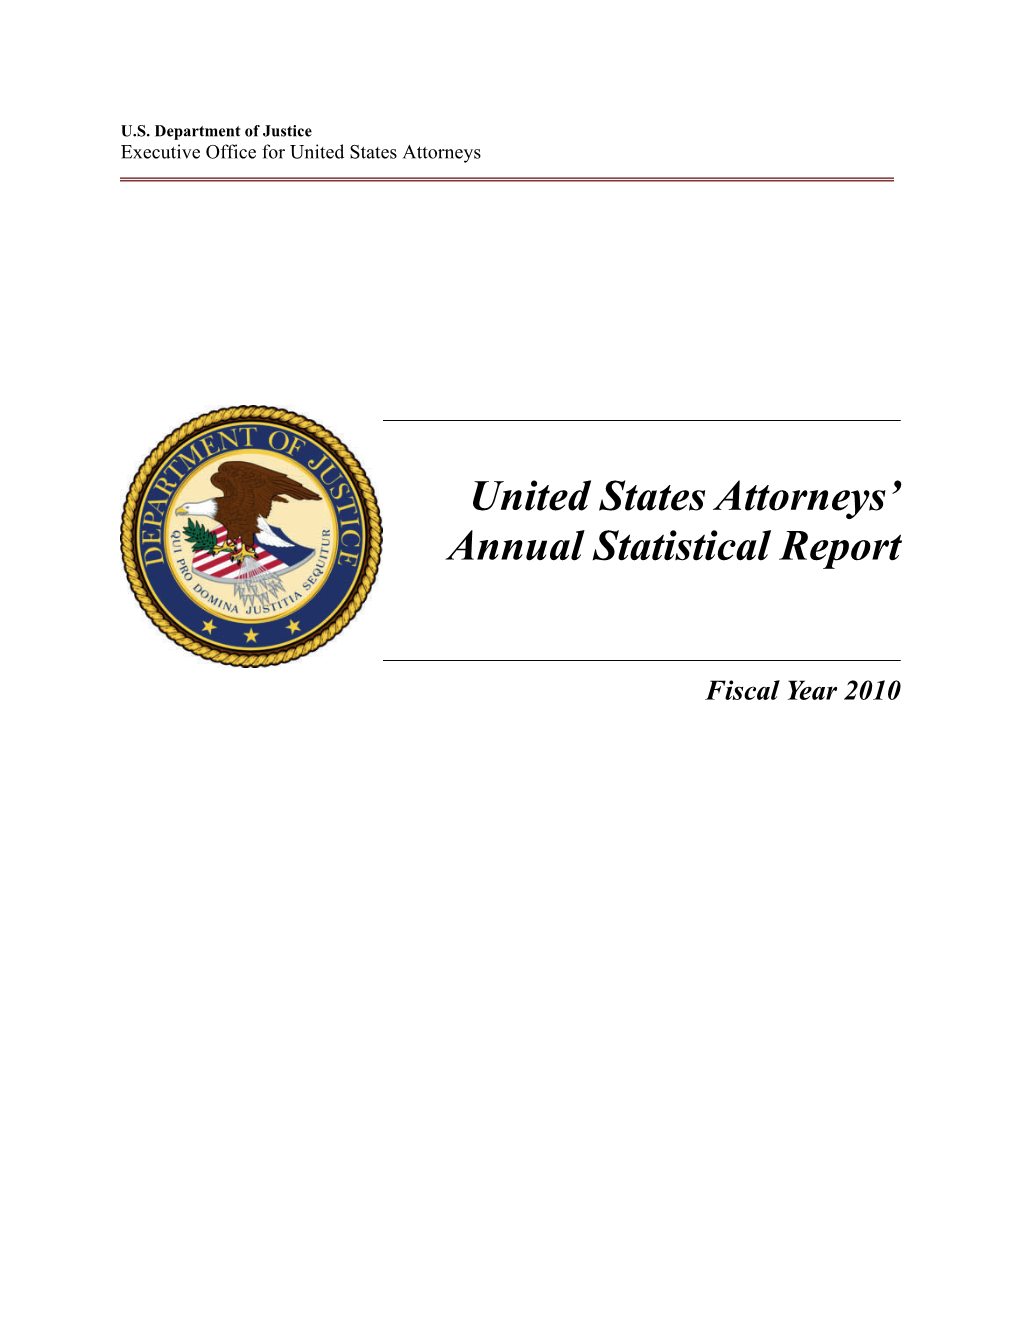 United States Attorneys' Annual Statistical Report